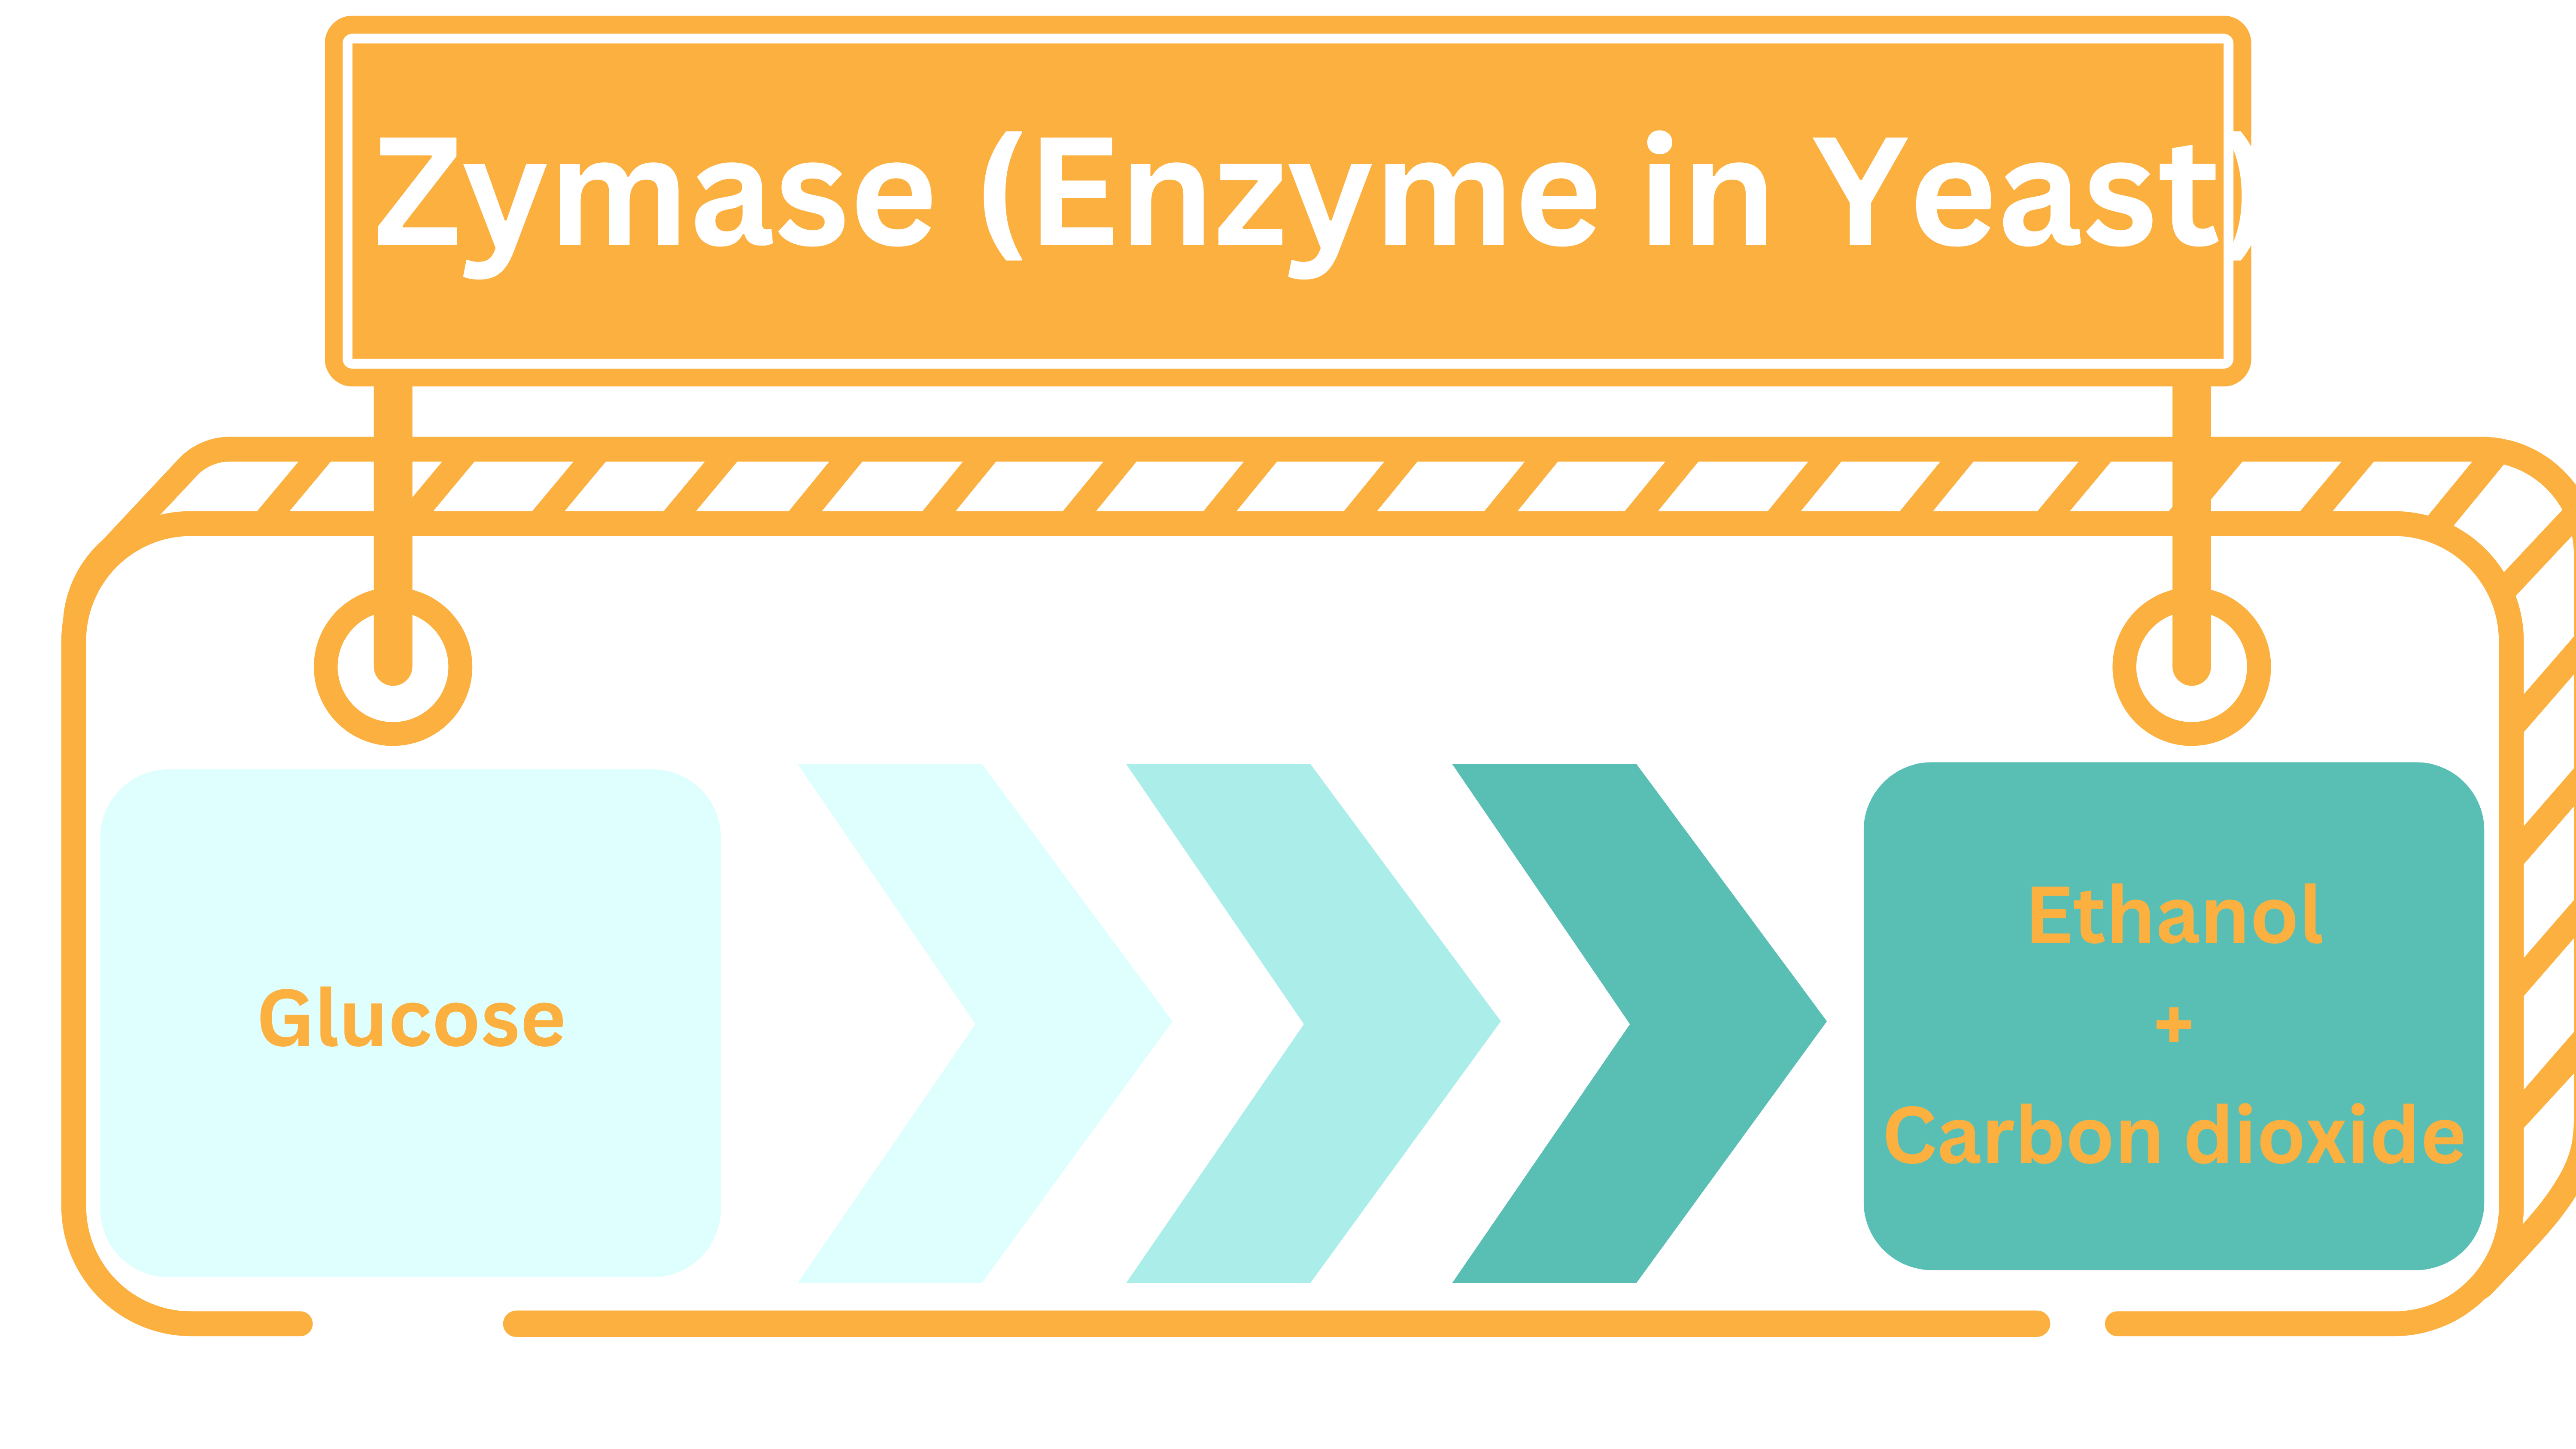 Enzyme in Yeast